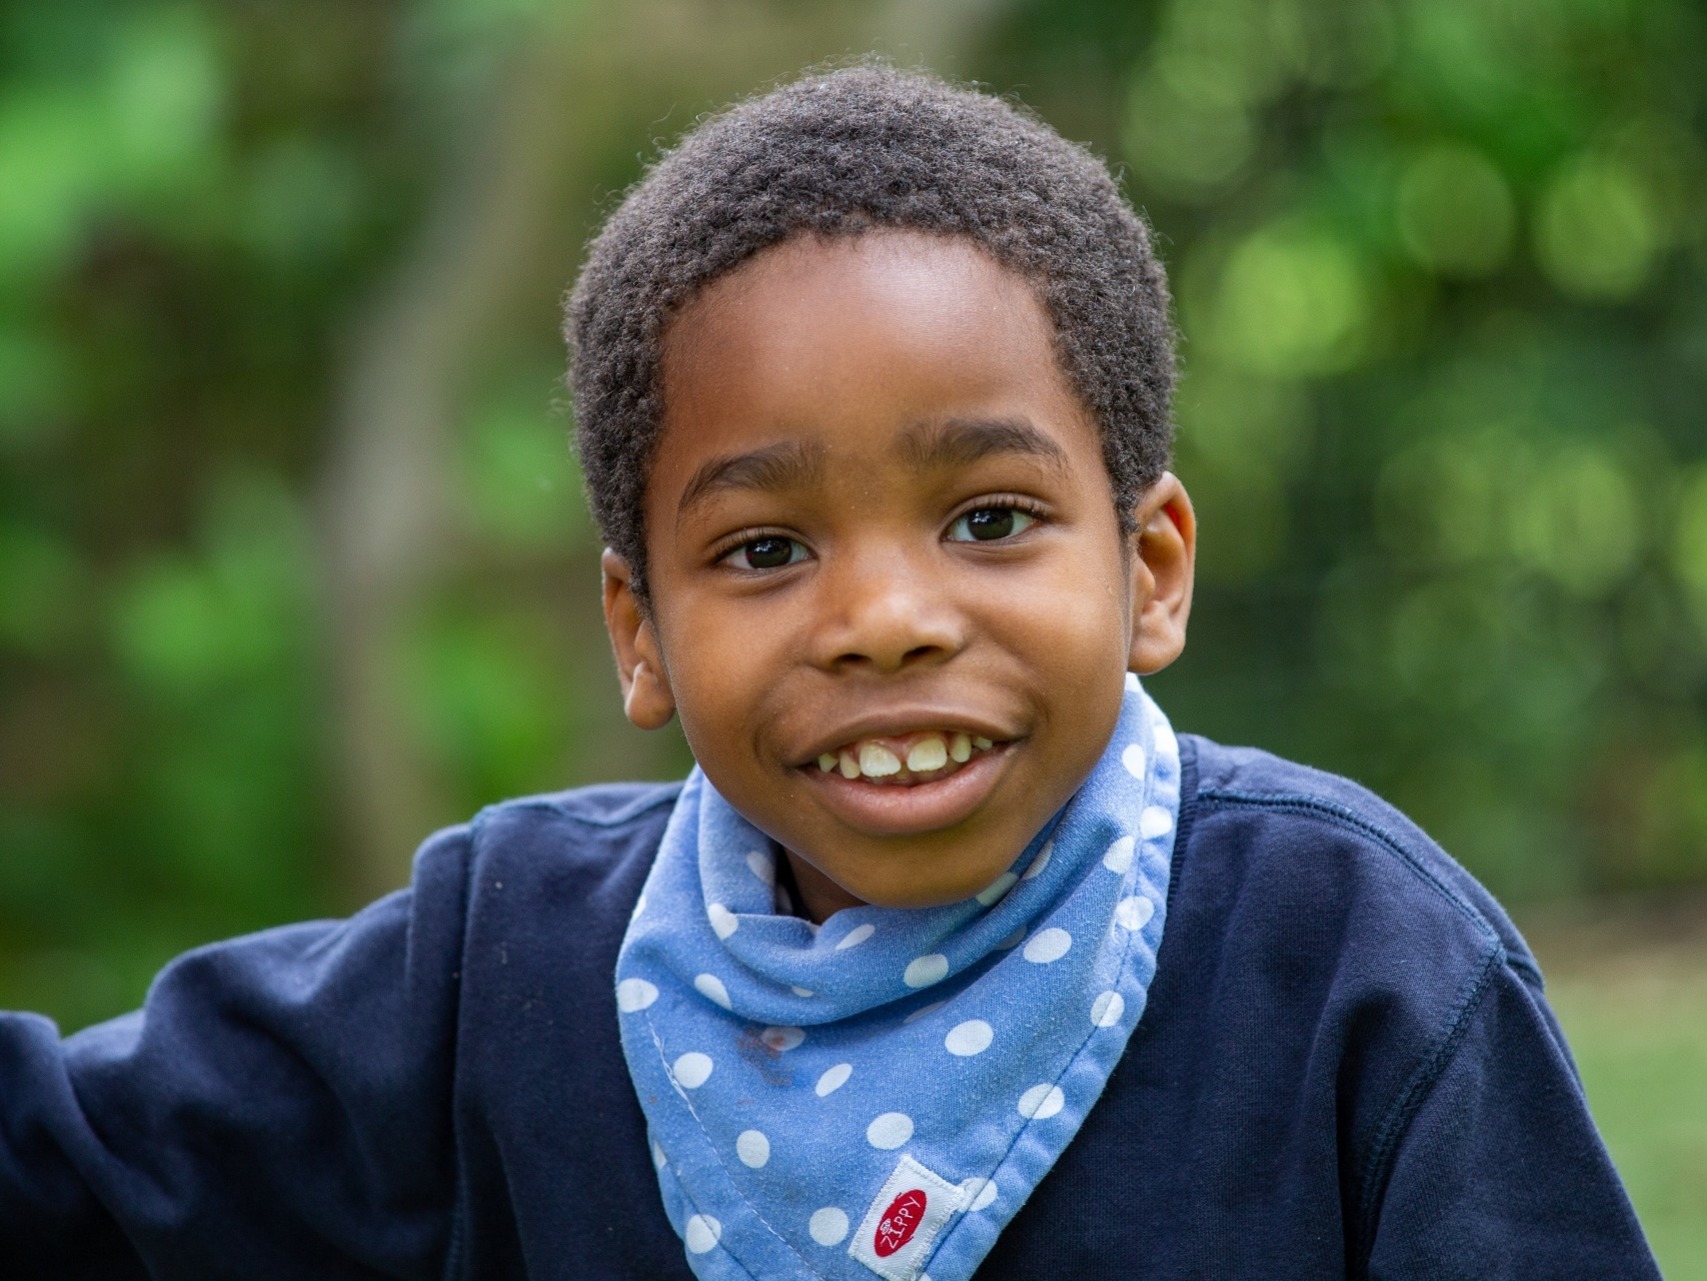 A young boy with learning disabilities in Hertfordshire school  photo shoot